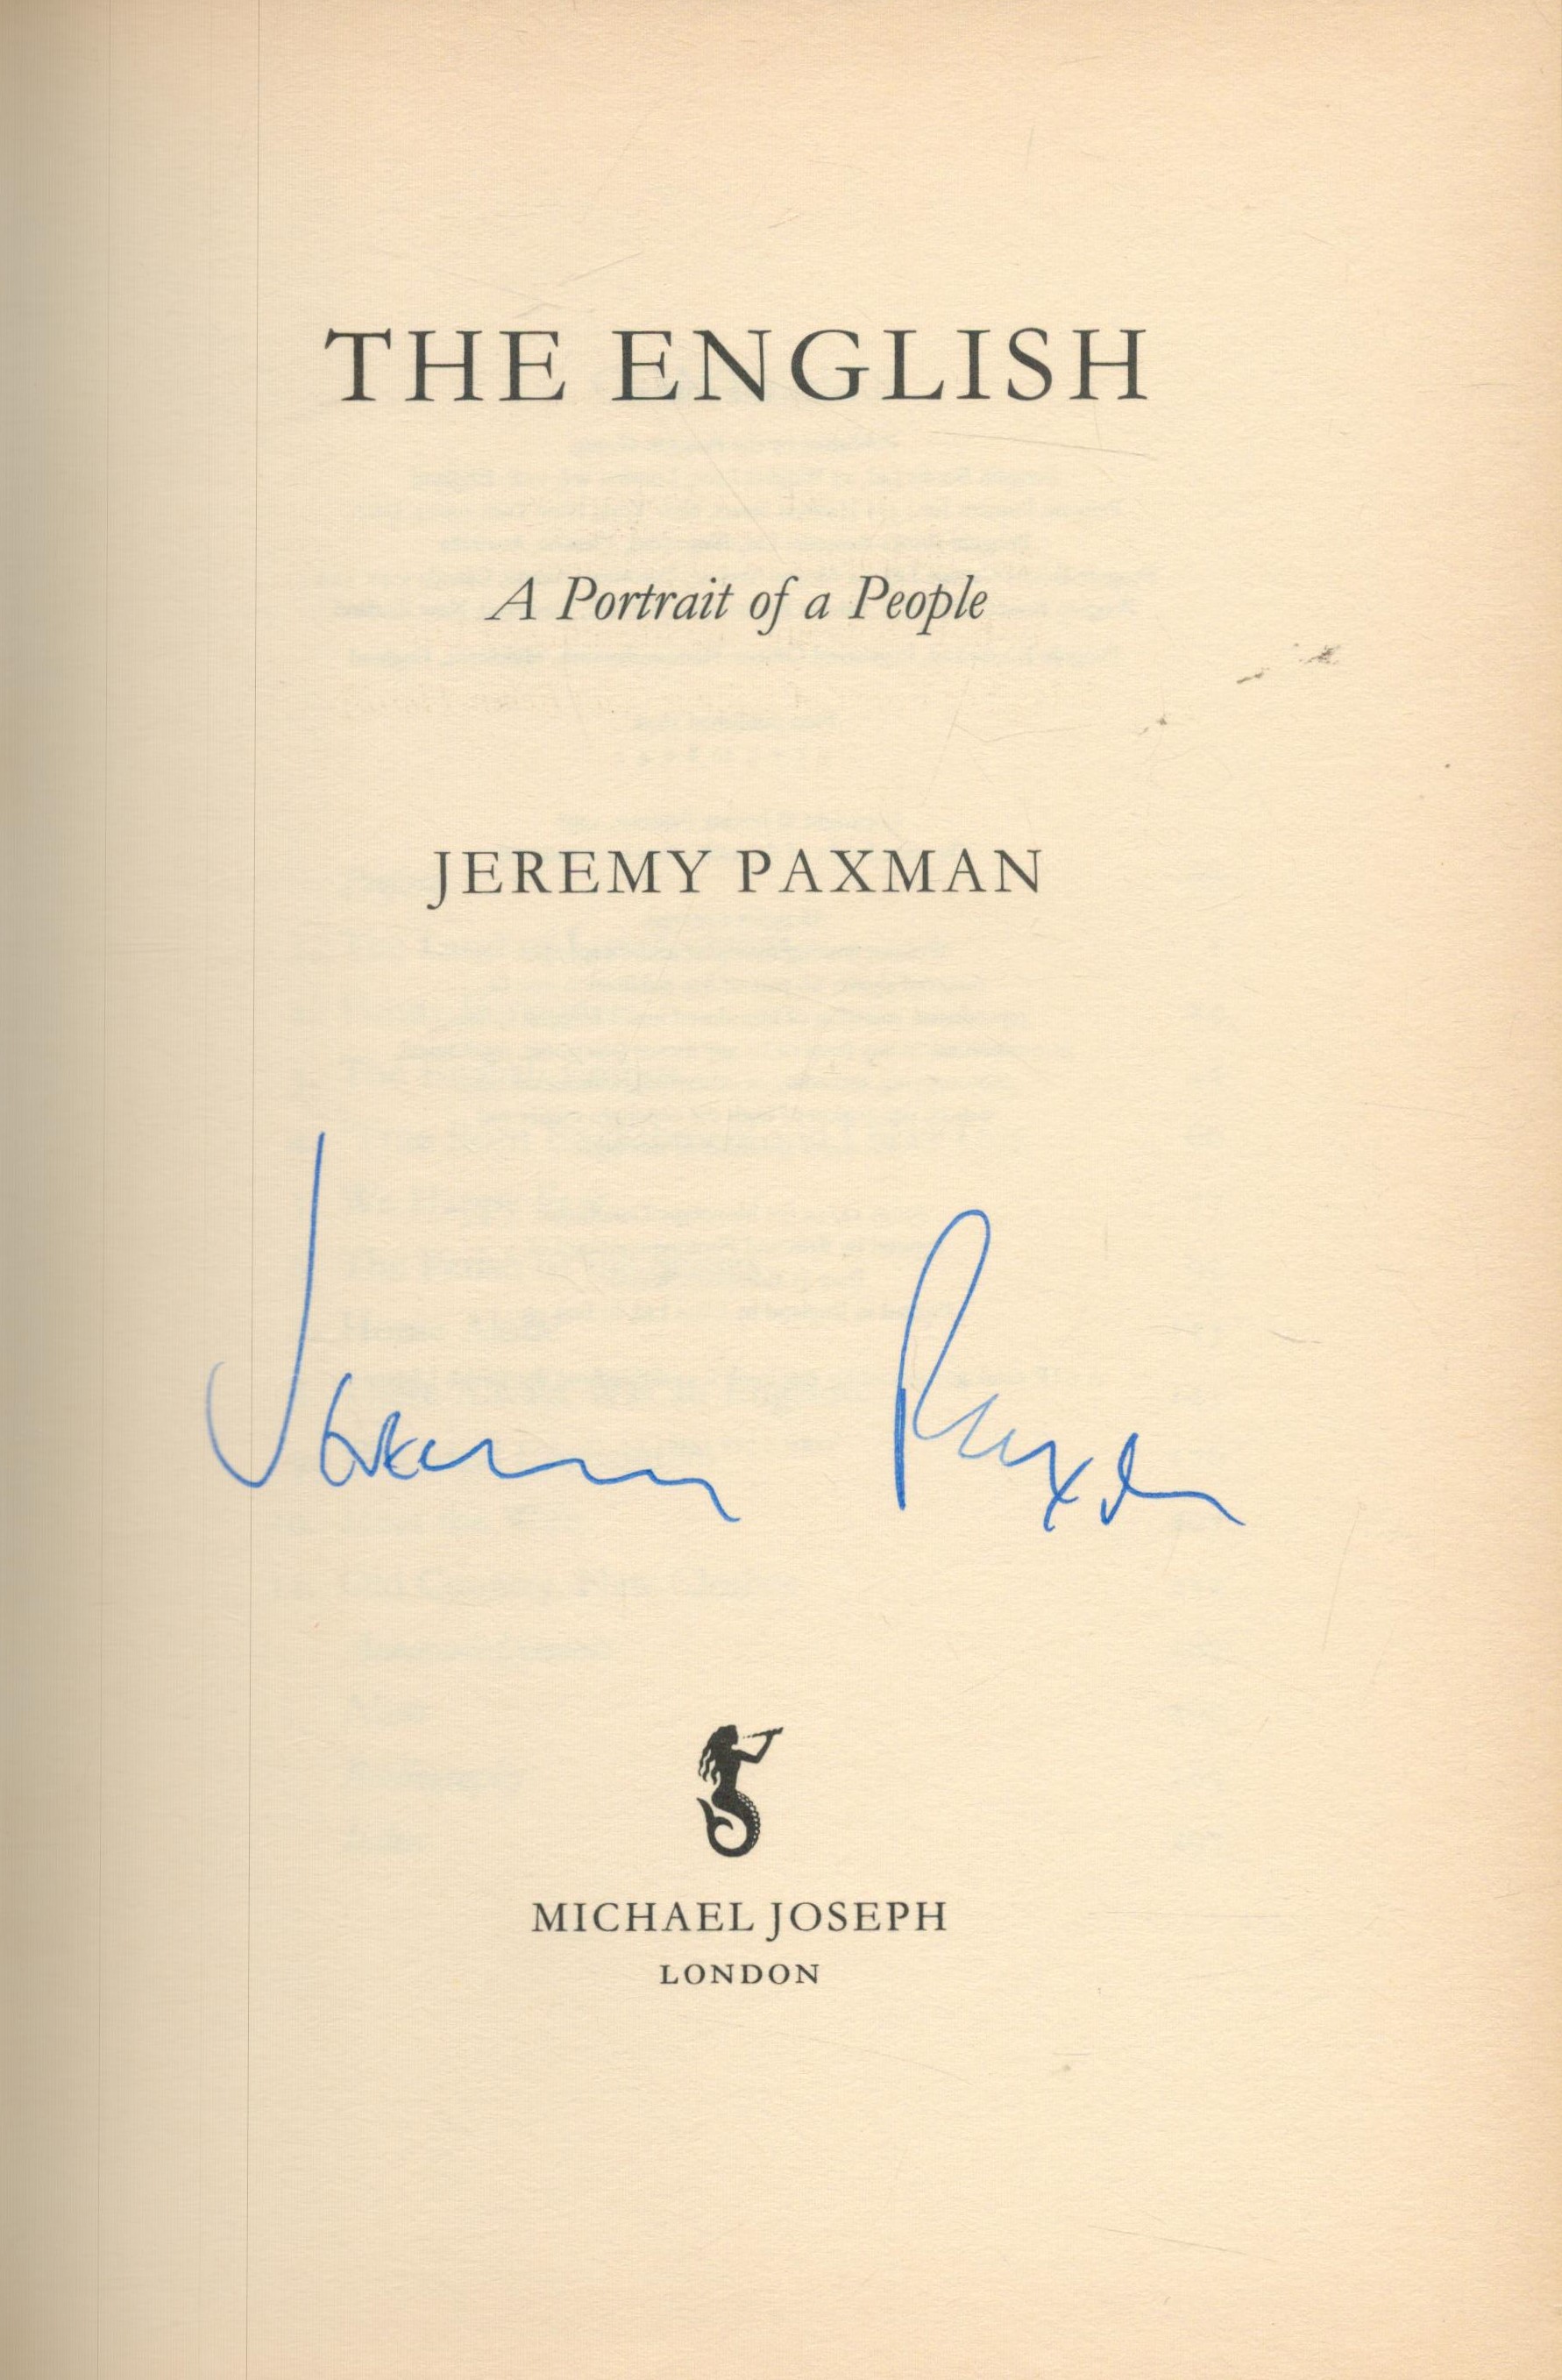 Jeremy Paxman Hardback Book The English A Portrait of People signed by the Author on the Title Page. - Bild 2 aus 3